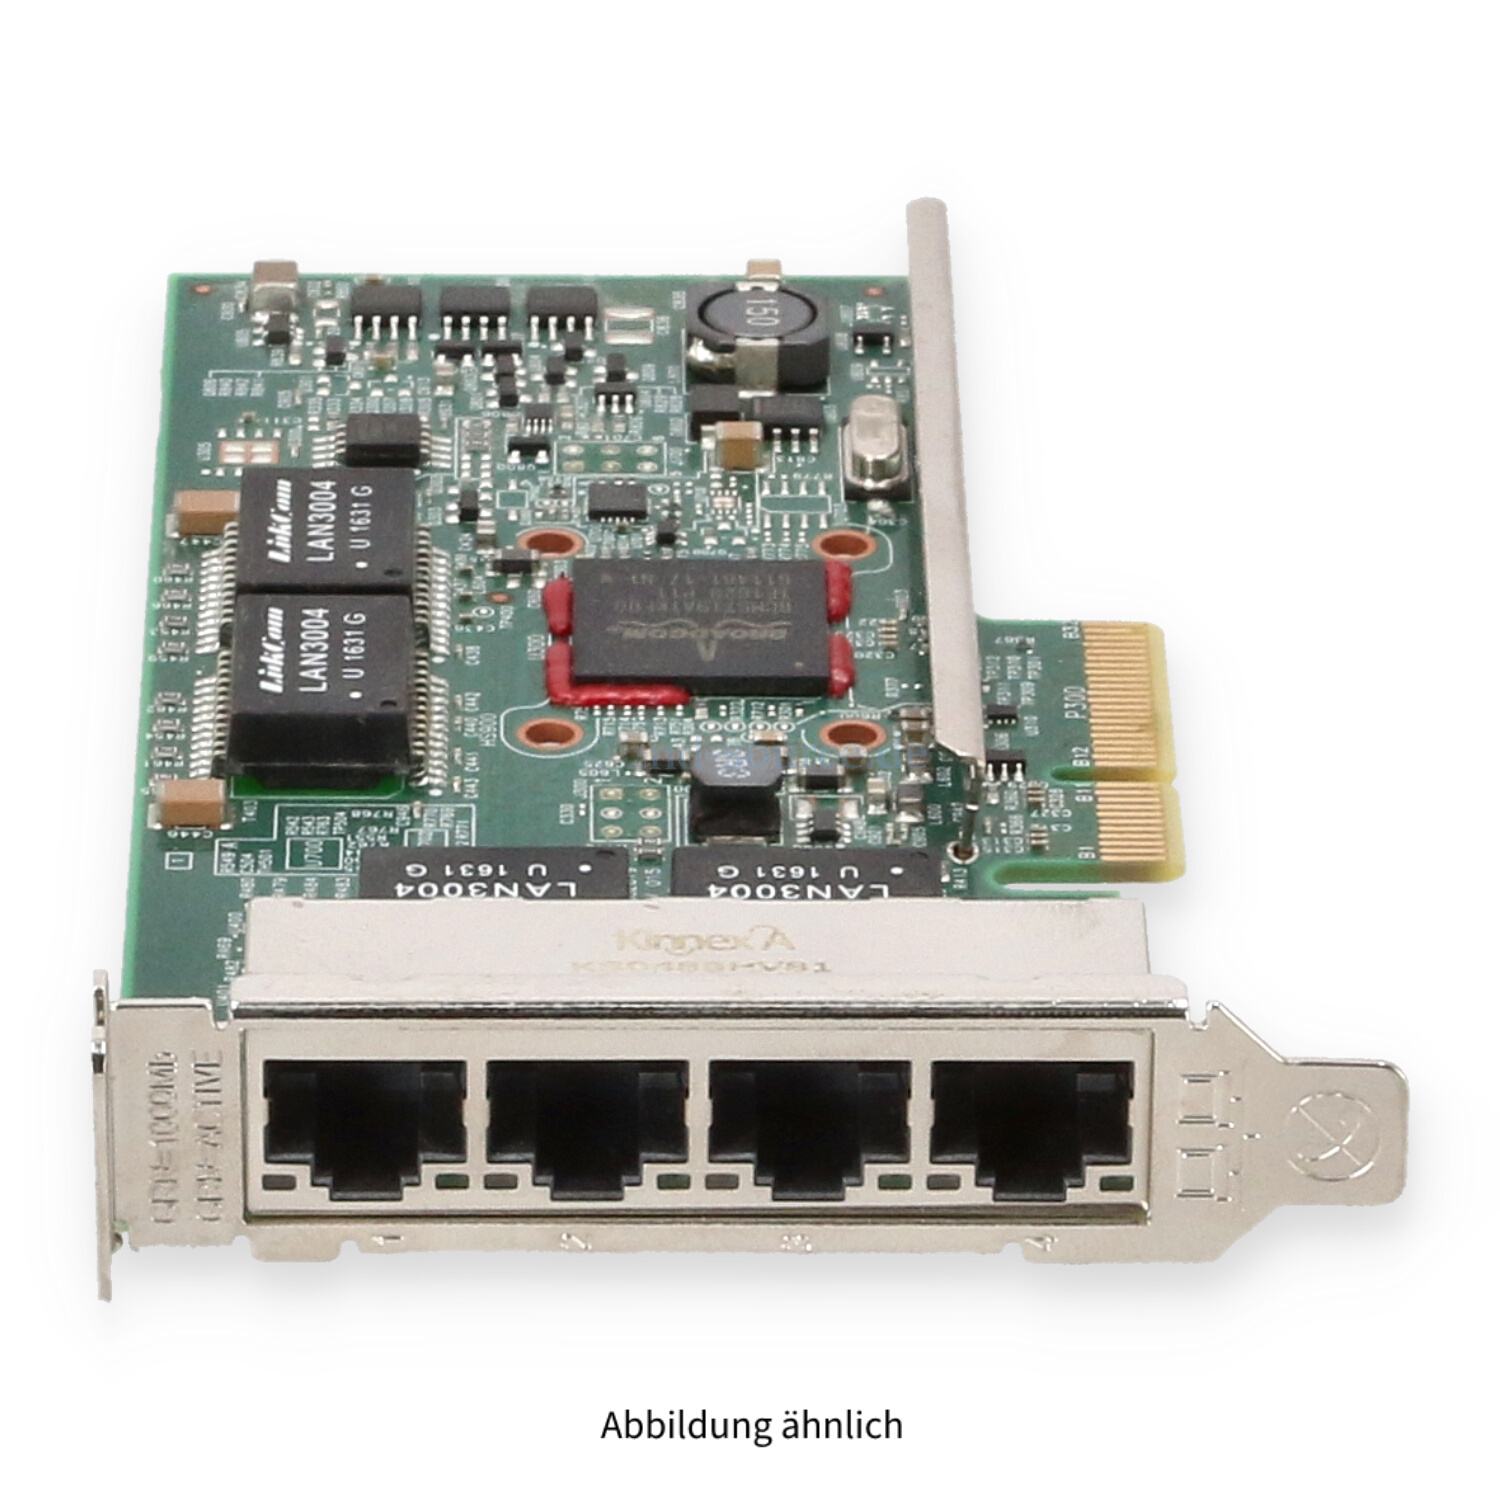 Dell Broadcom 5719 4x 1GbE PCIe Server Ethernet Adapter Low Profile YGCV4 0YGCV4